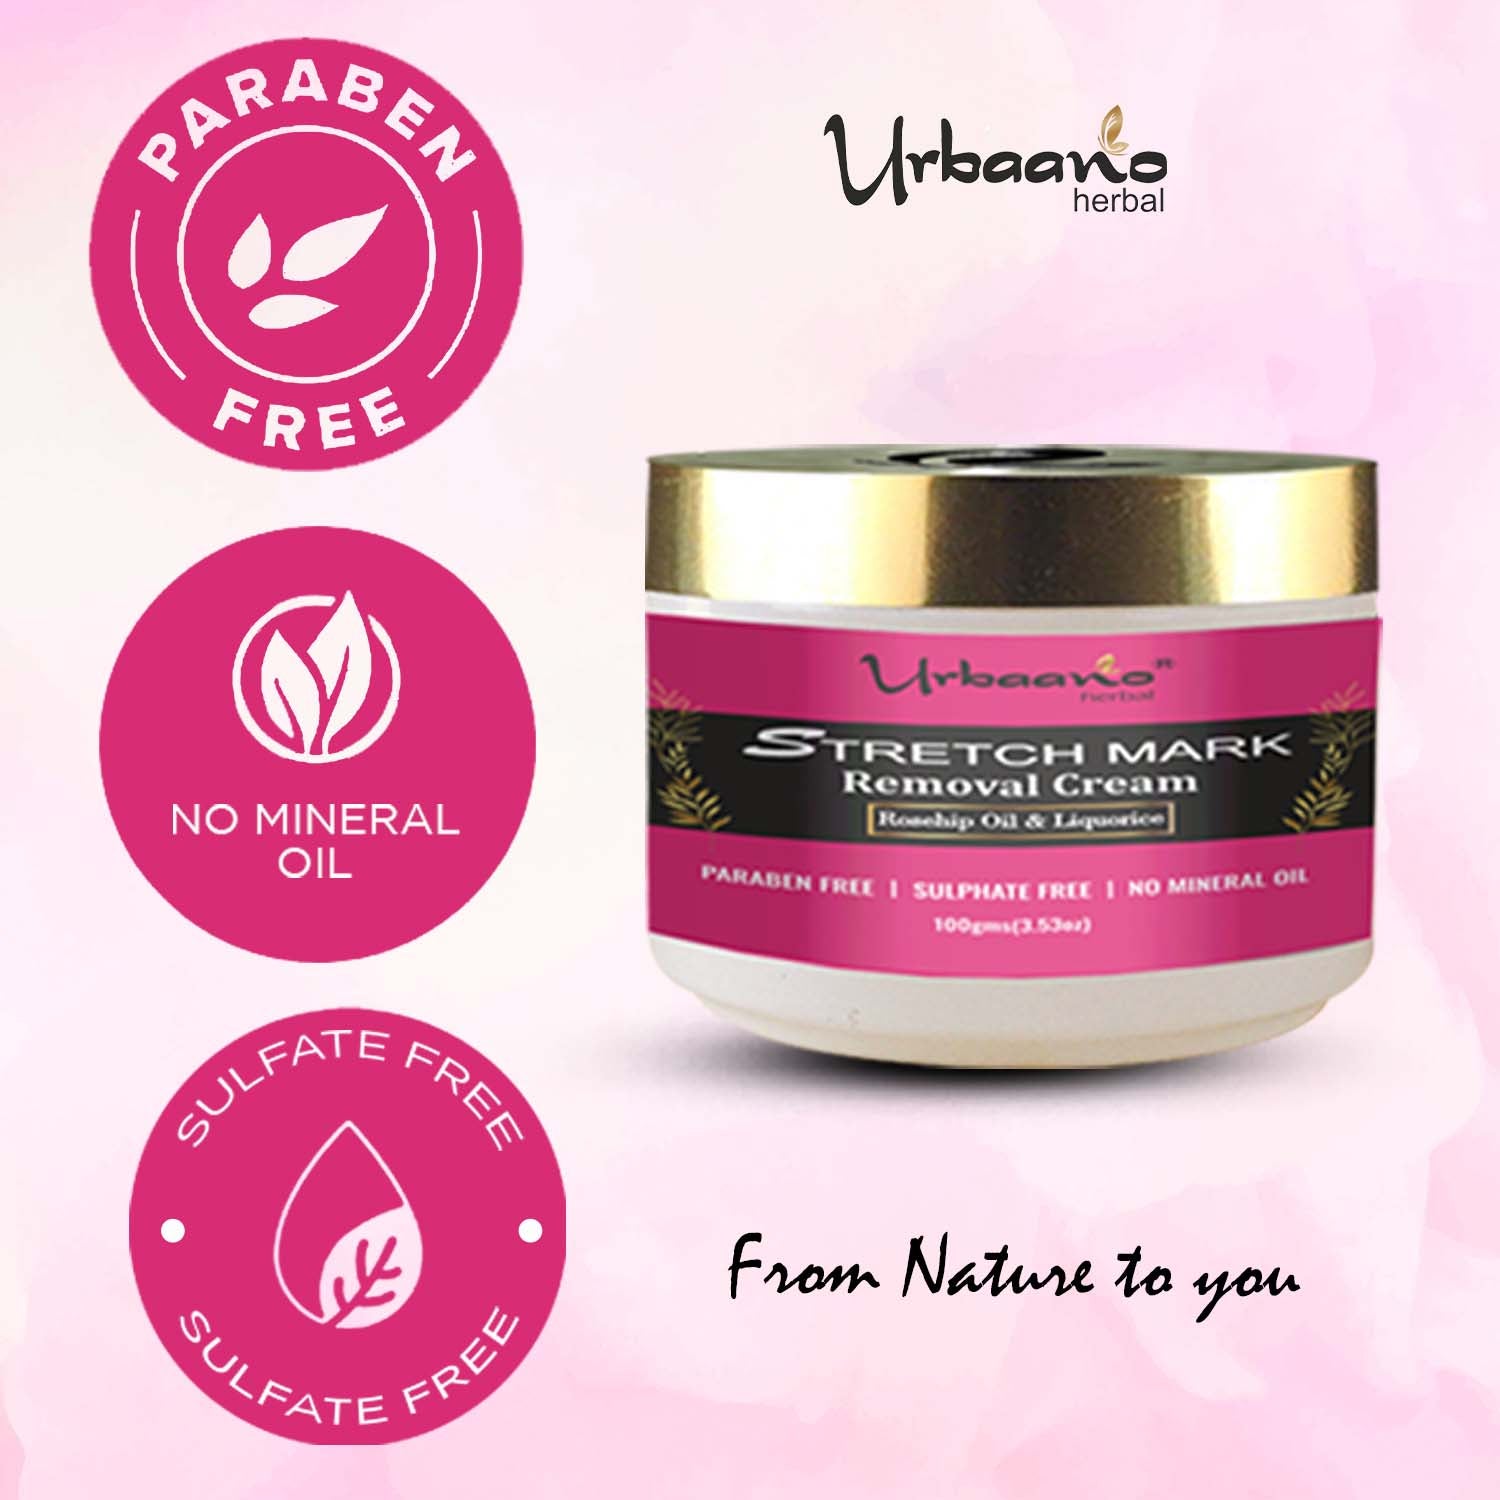 urbaano herbal stretch mark removal body cream  is skin friendly, safe skin friendly.  Sulphate, mineral oil, paraben free, from nature to you